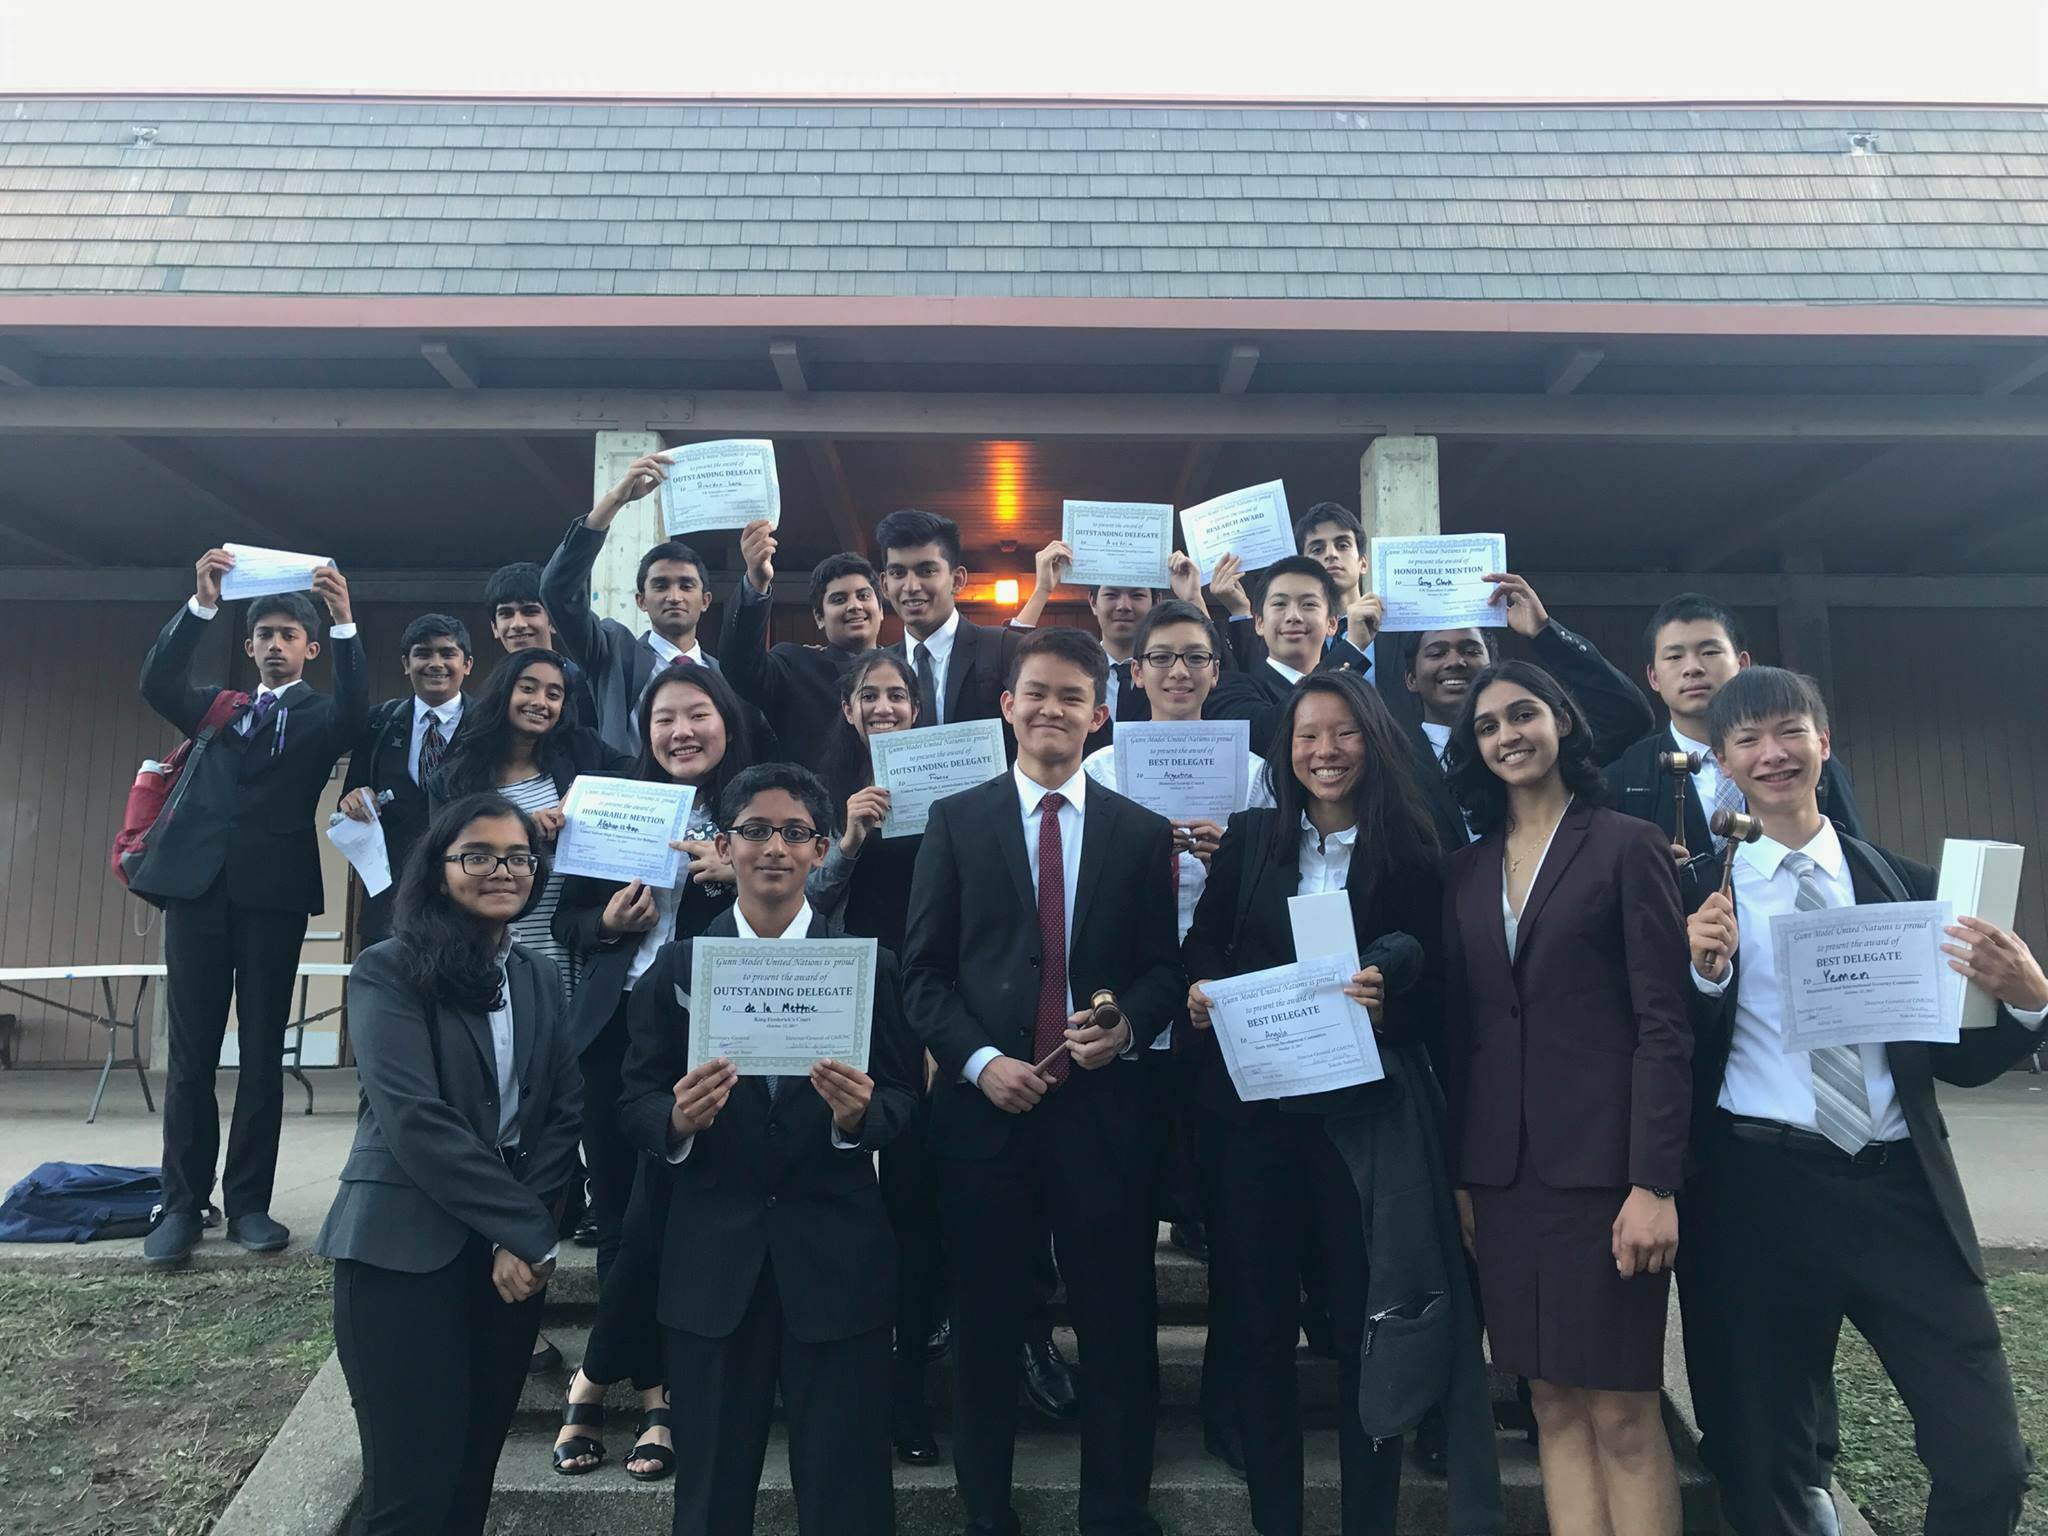 The MVHS MUN delegation poses with their awards after the GHS conference. The conference was the first of the 2017-2018 school year. Photo used with permission from Amit Chandramouly.